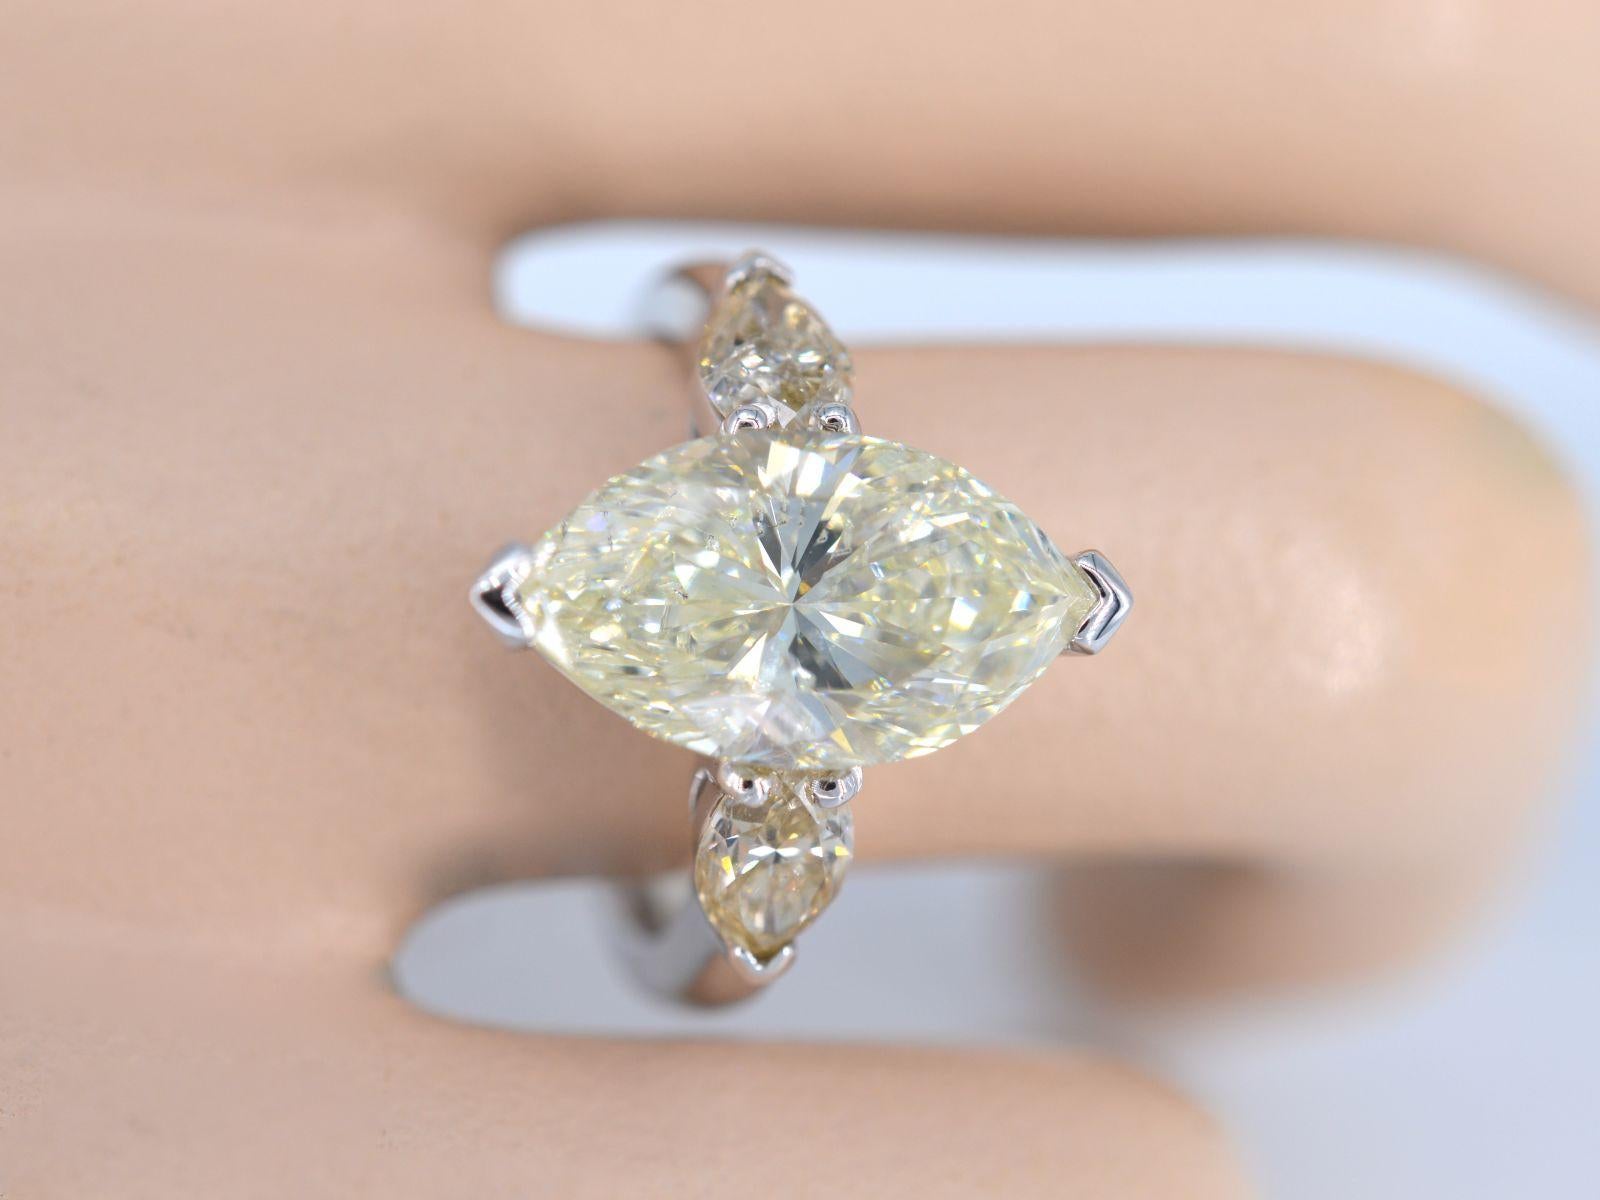 The golden ring described is a truly exceptional piece of jewelry, featuring a marquise cut diamond at its center that boasts an impressive size of 5.45 carats. This type of diamond cut is renowned for its unique shape, which combines pointed ends